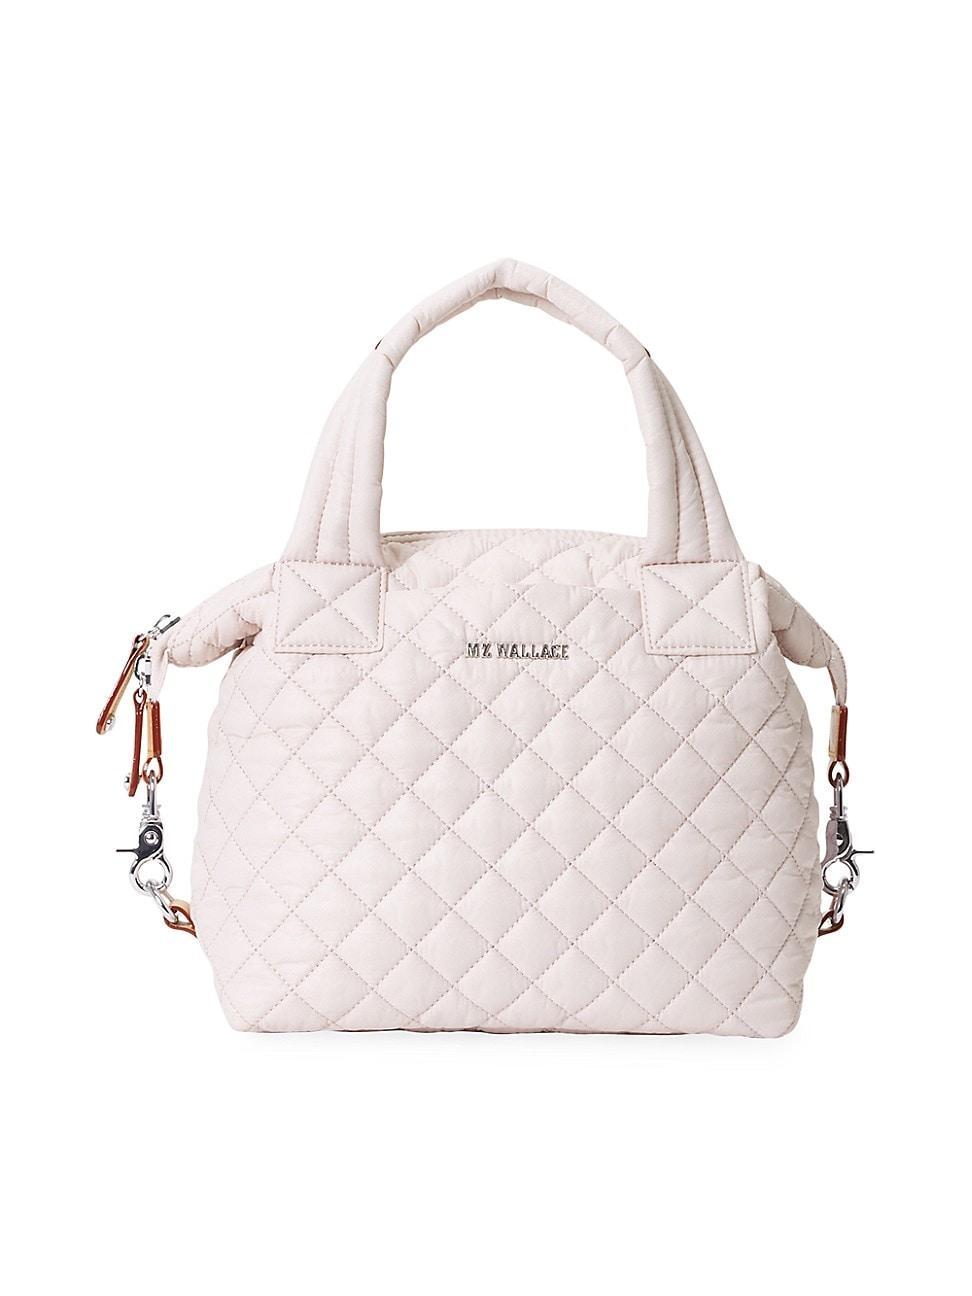 Womens Small Sutton Deluxe Shoulder Bag Product Image